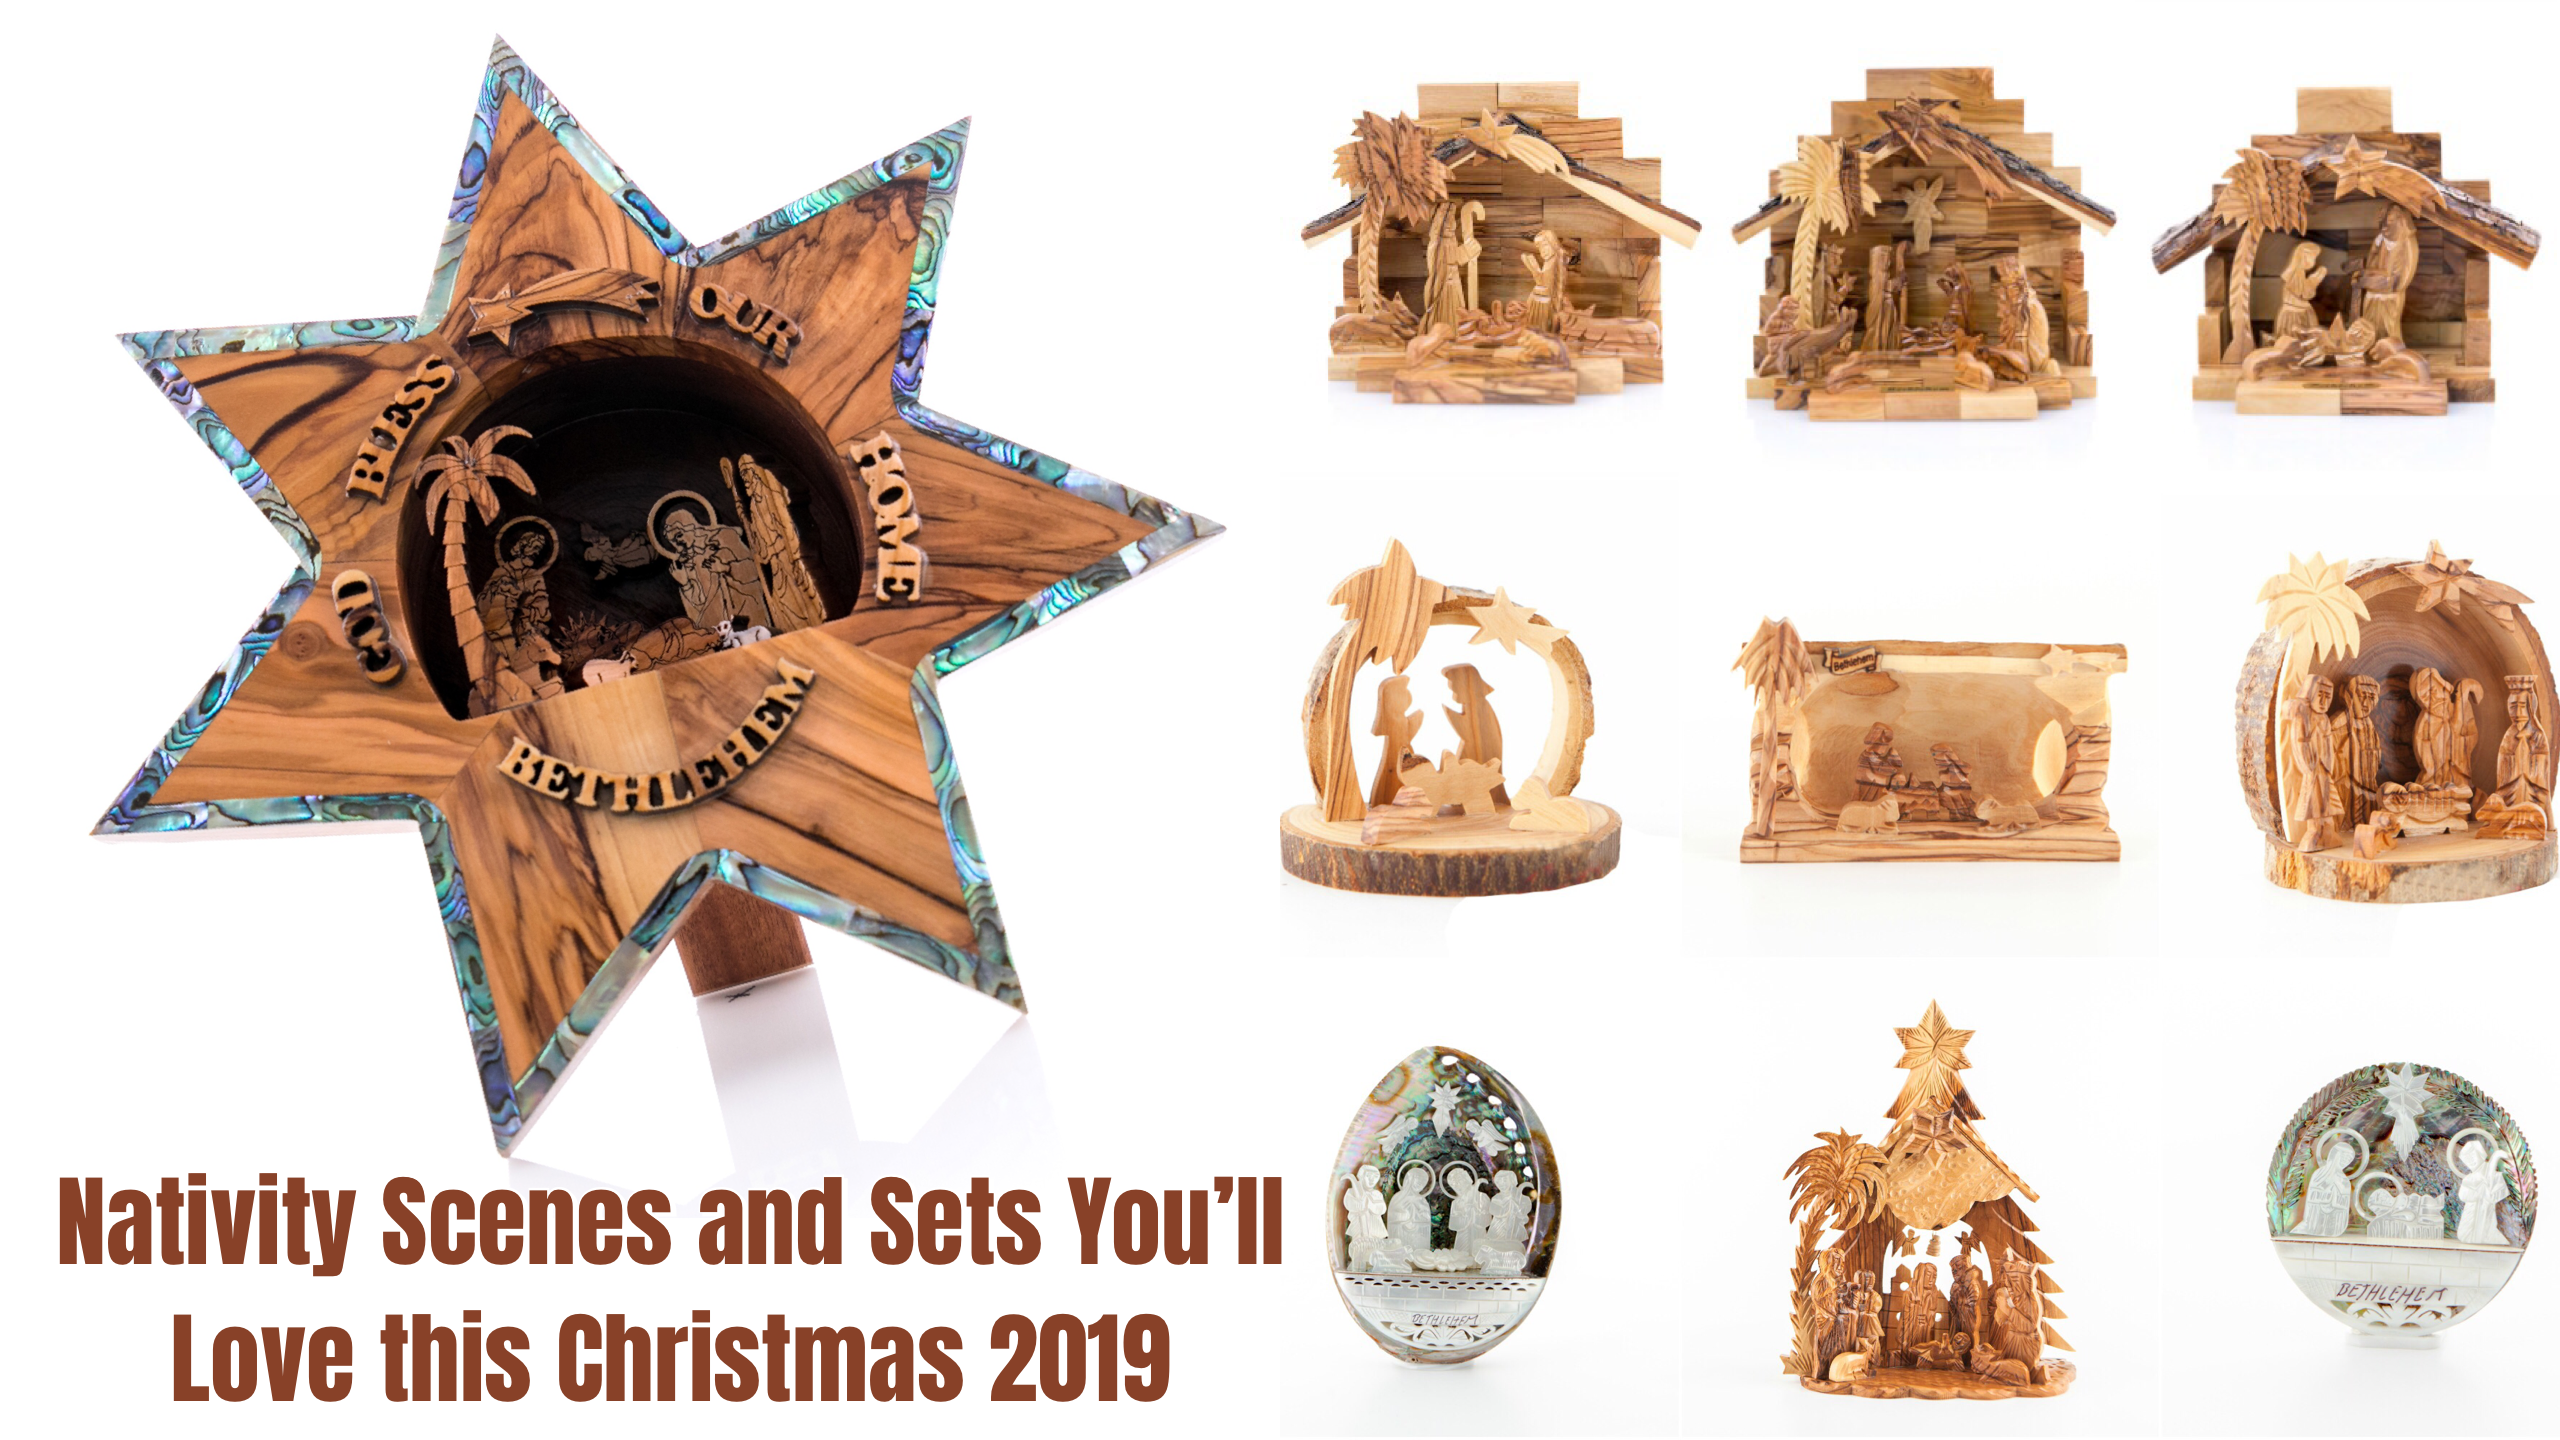 Nativity Scenes and Sets You'll Love this Christmas 2019